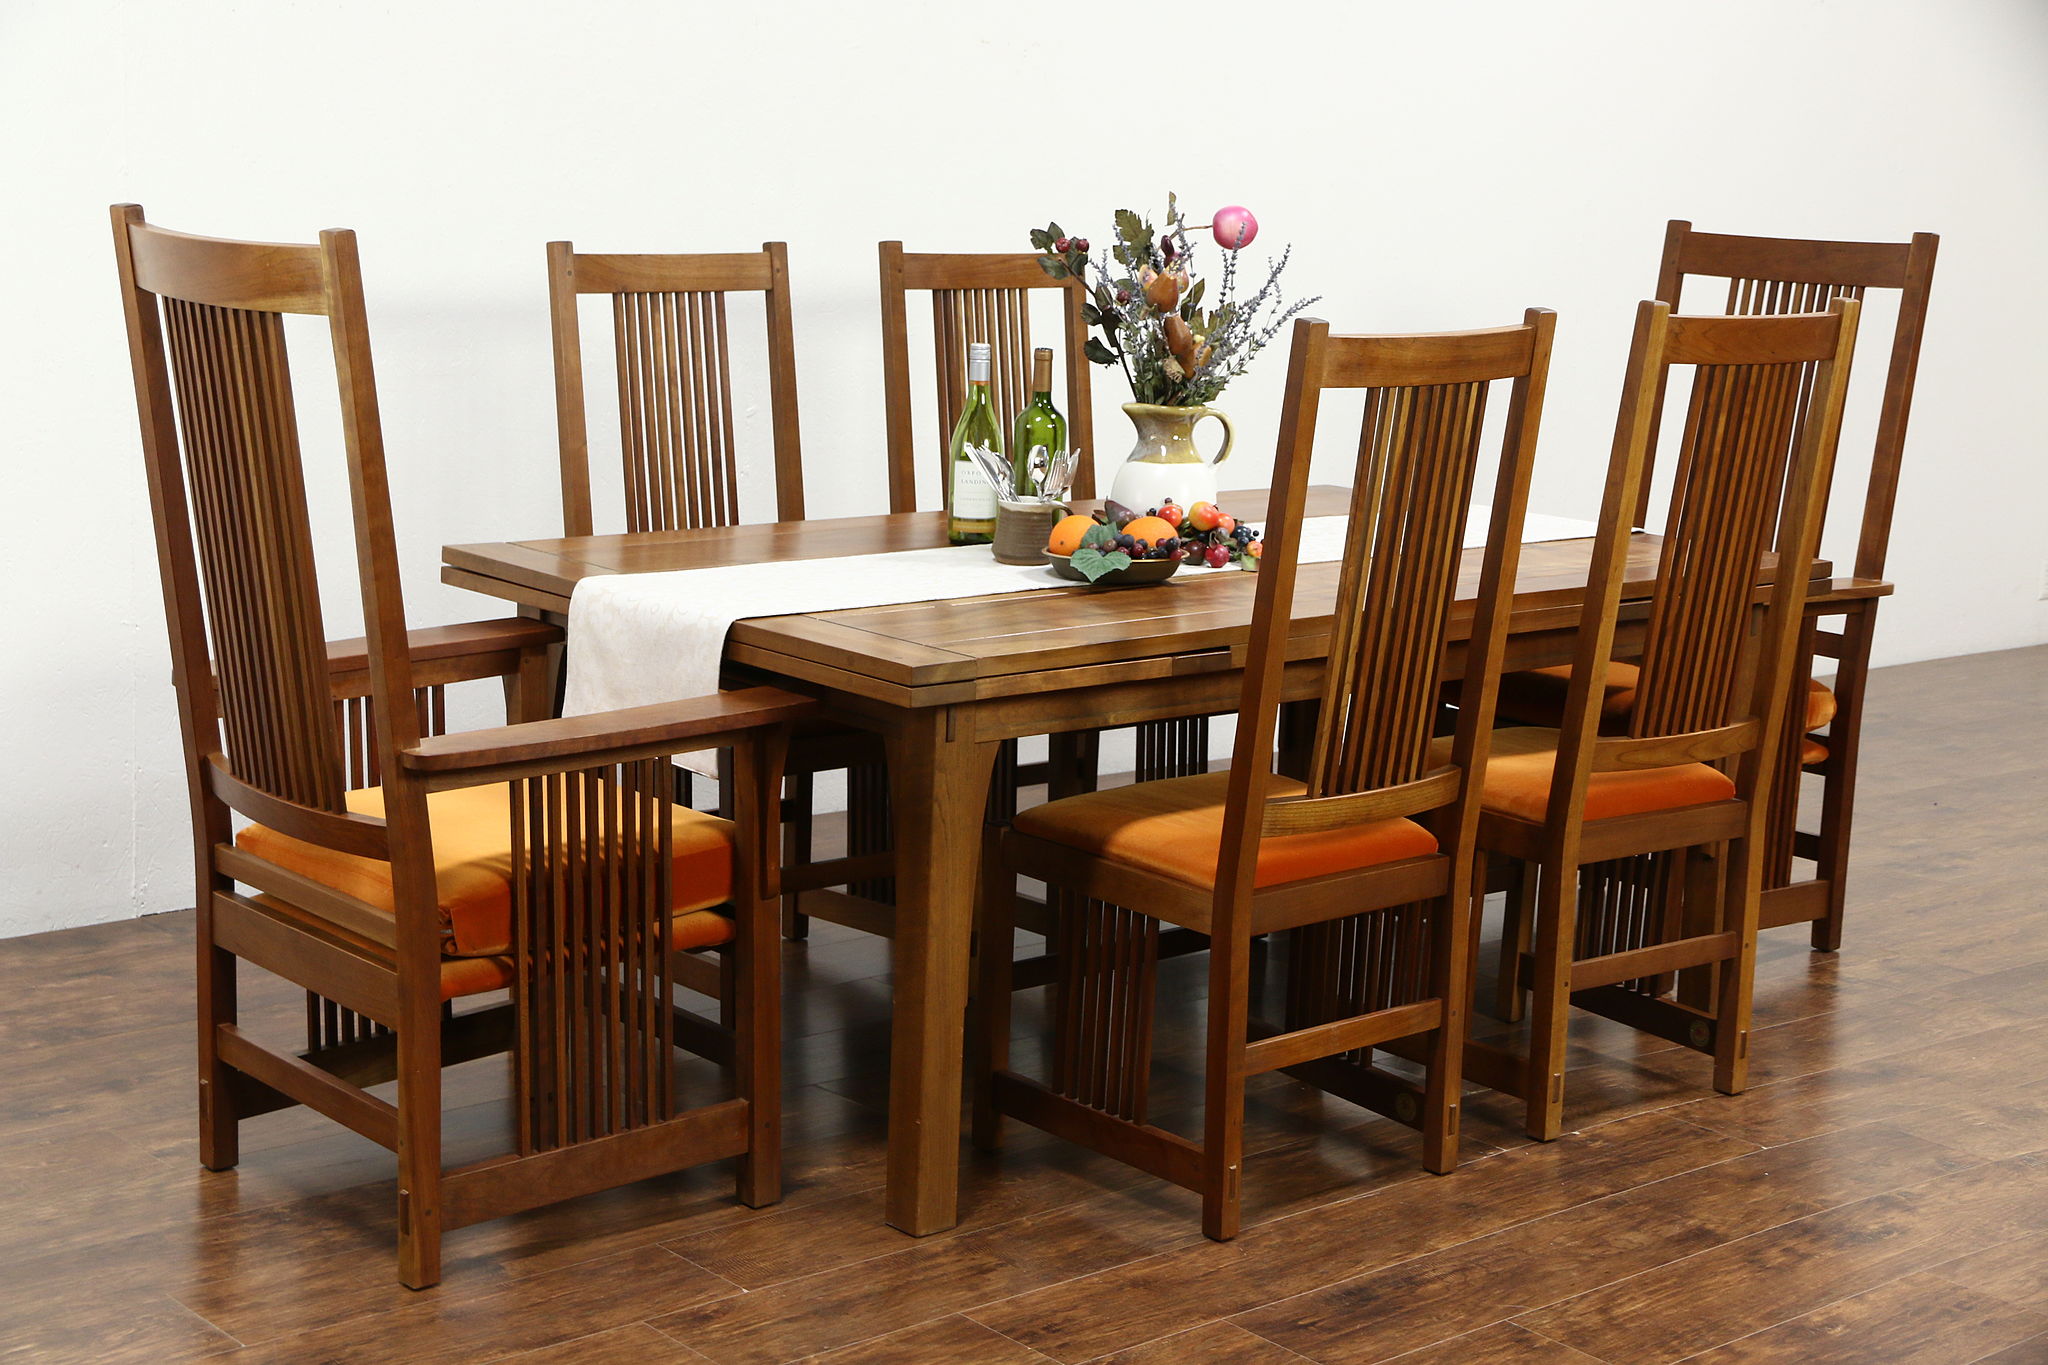 Craftsman Dining Room Table And Chairs